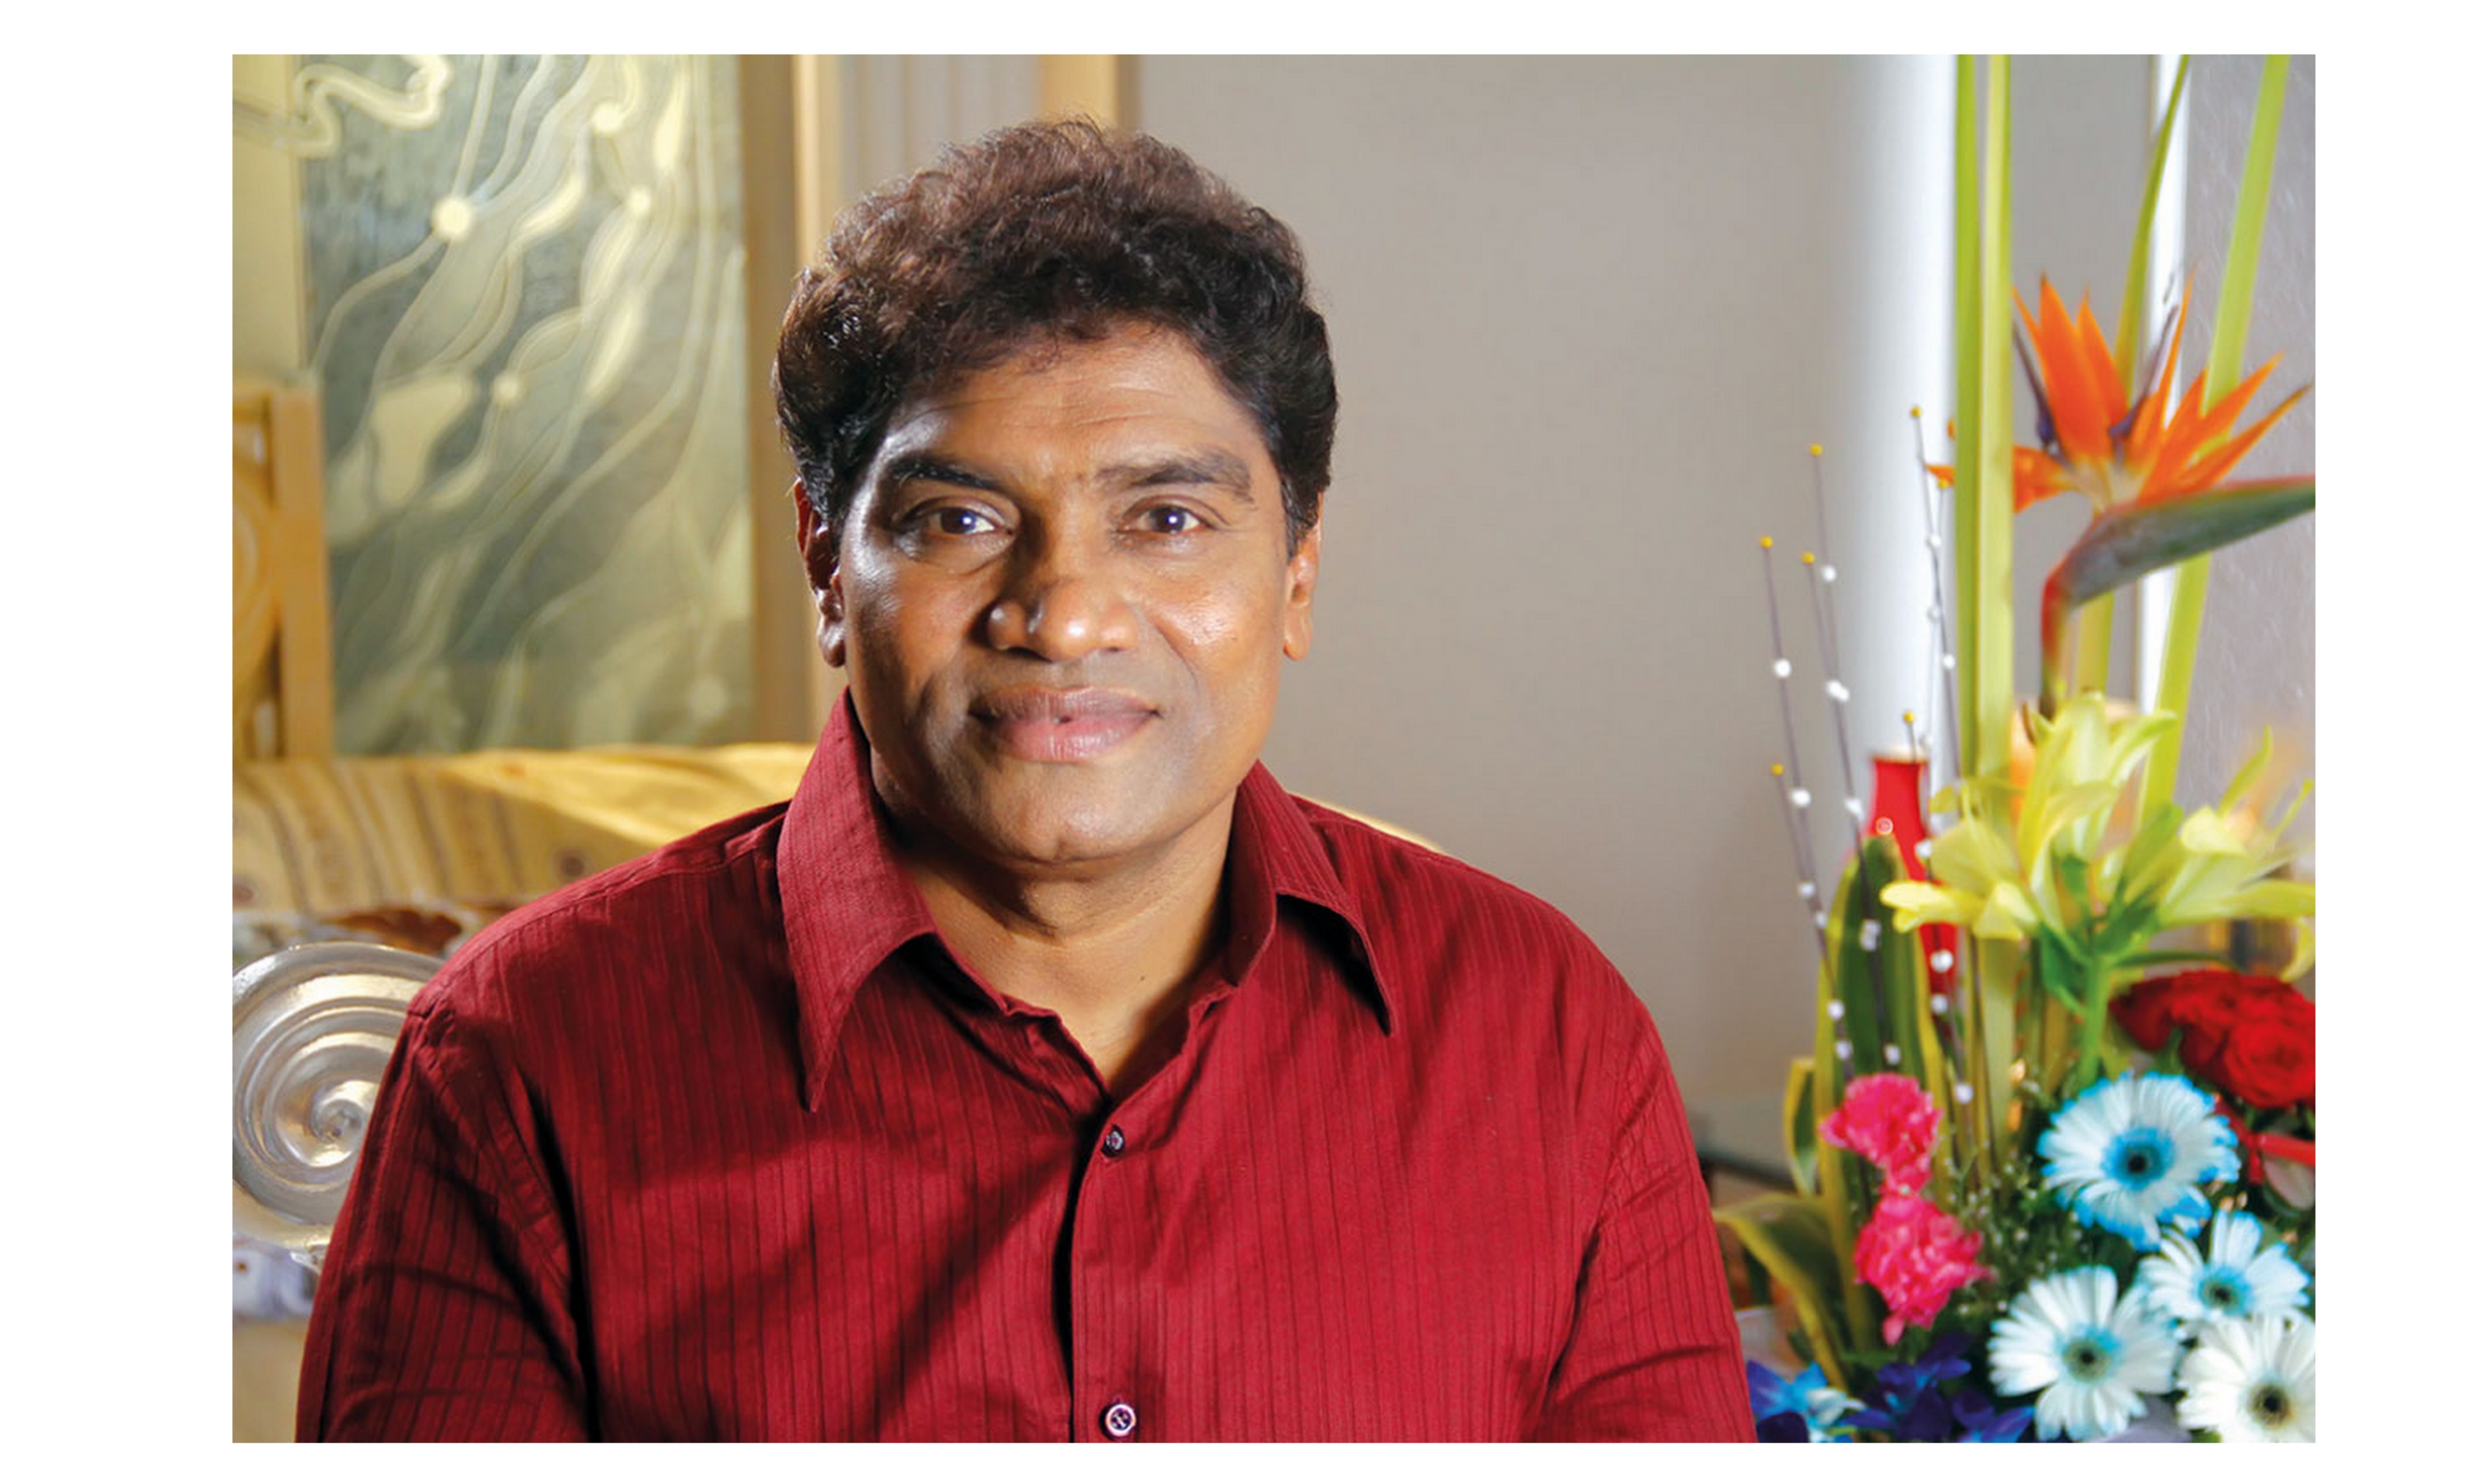 Johnny lever comeing on television after 10 years!